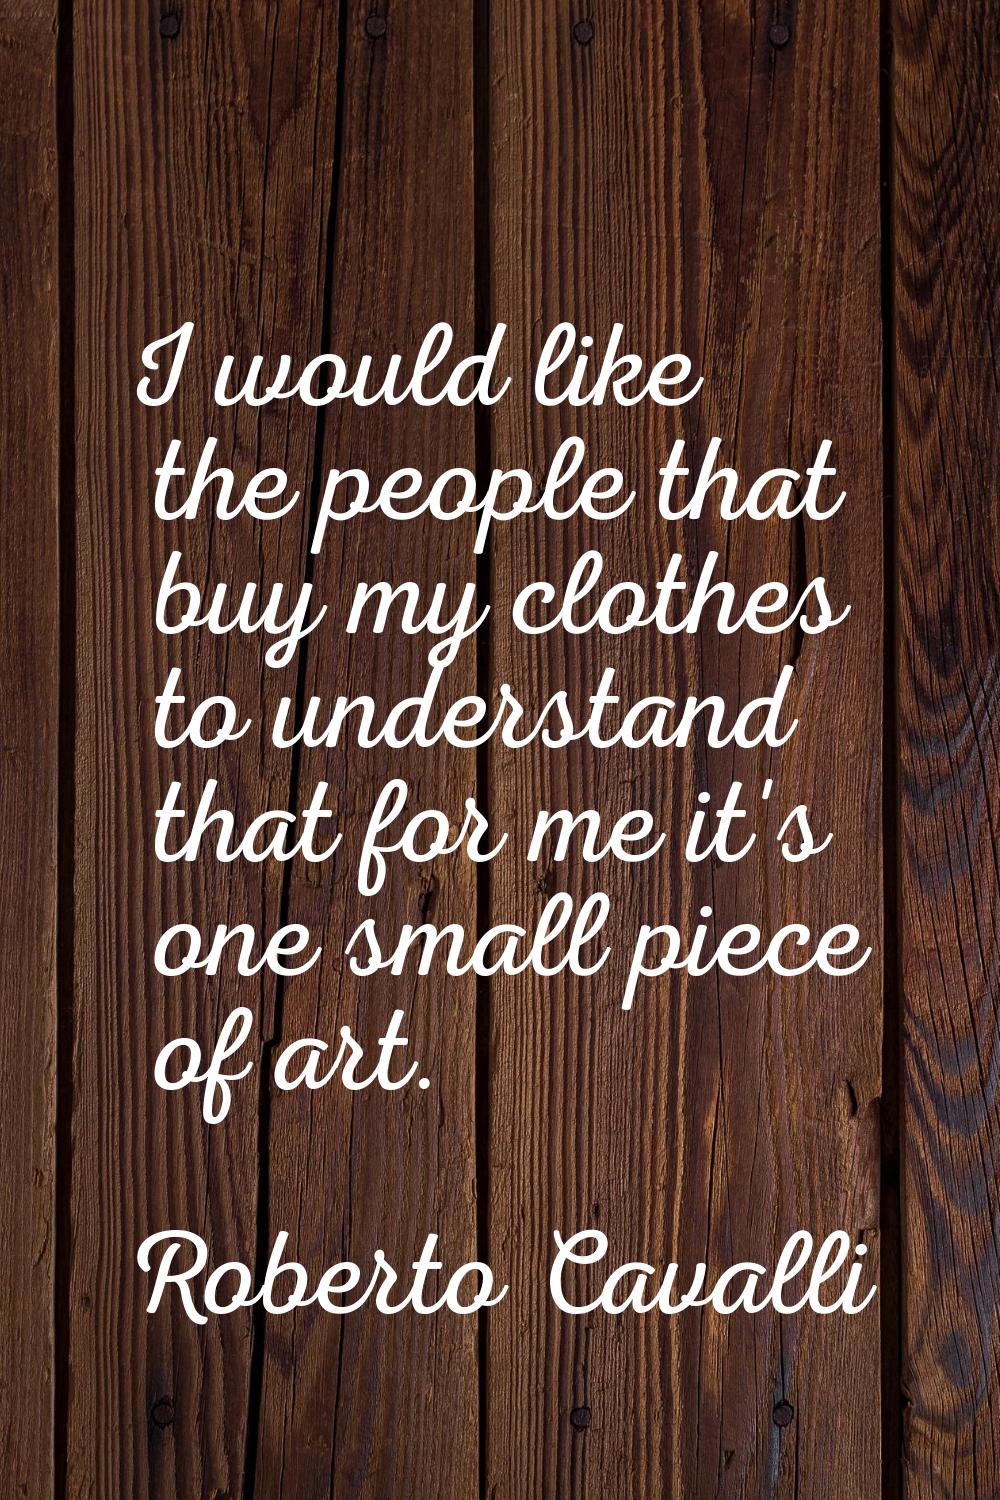 I would like the people that buy my clothes to understand that for me it's one small piece of art.